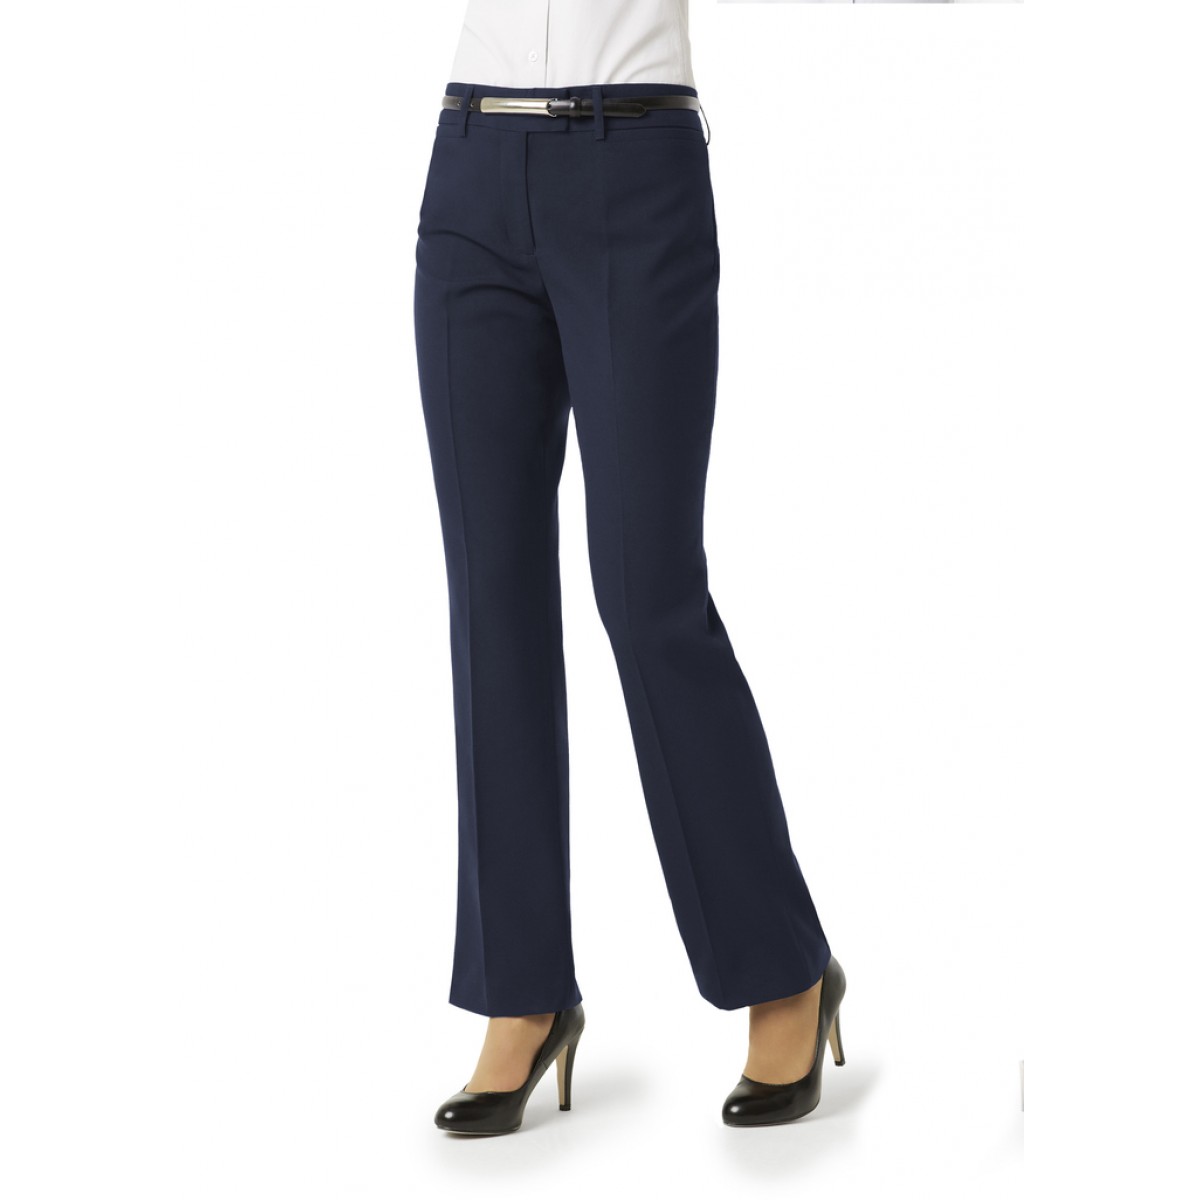 Cato Navy Blue Flat Front Fully Lined Causal Dress Pants Womens